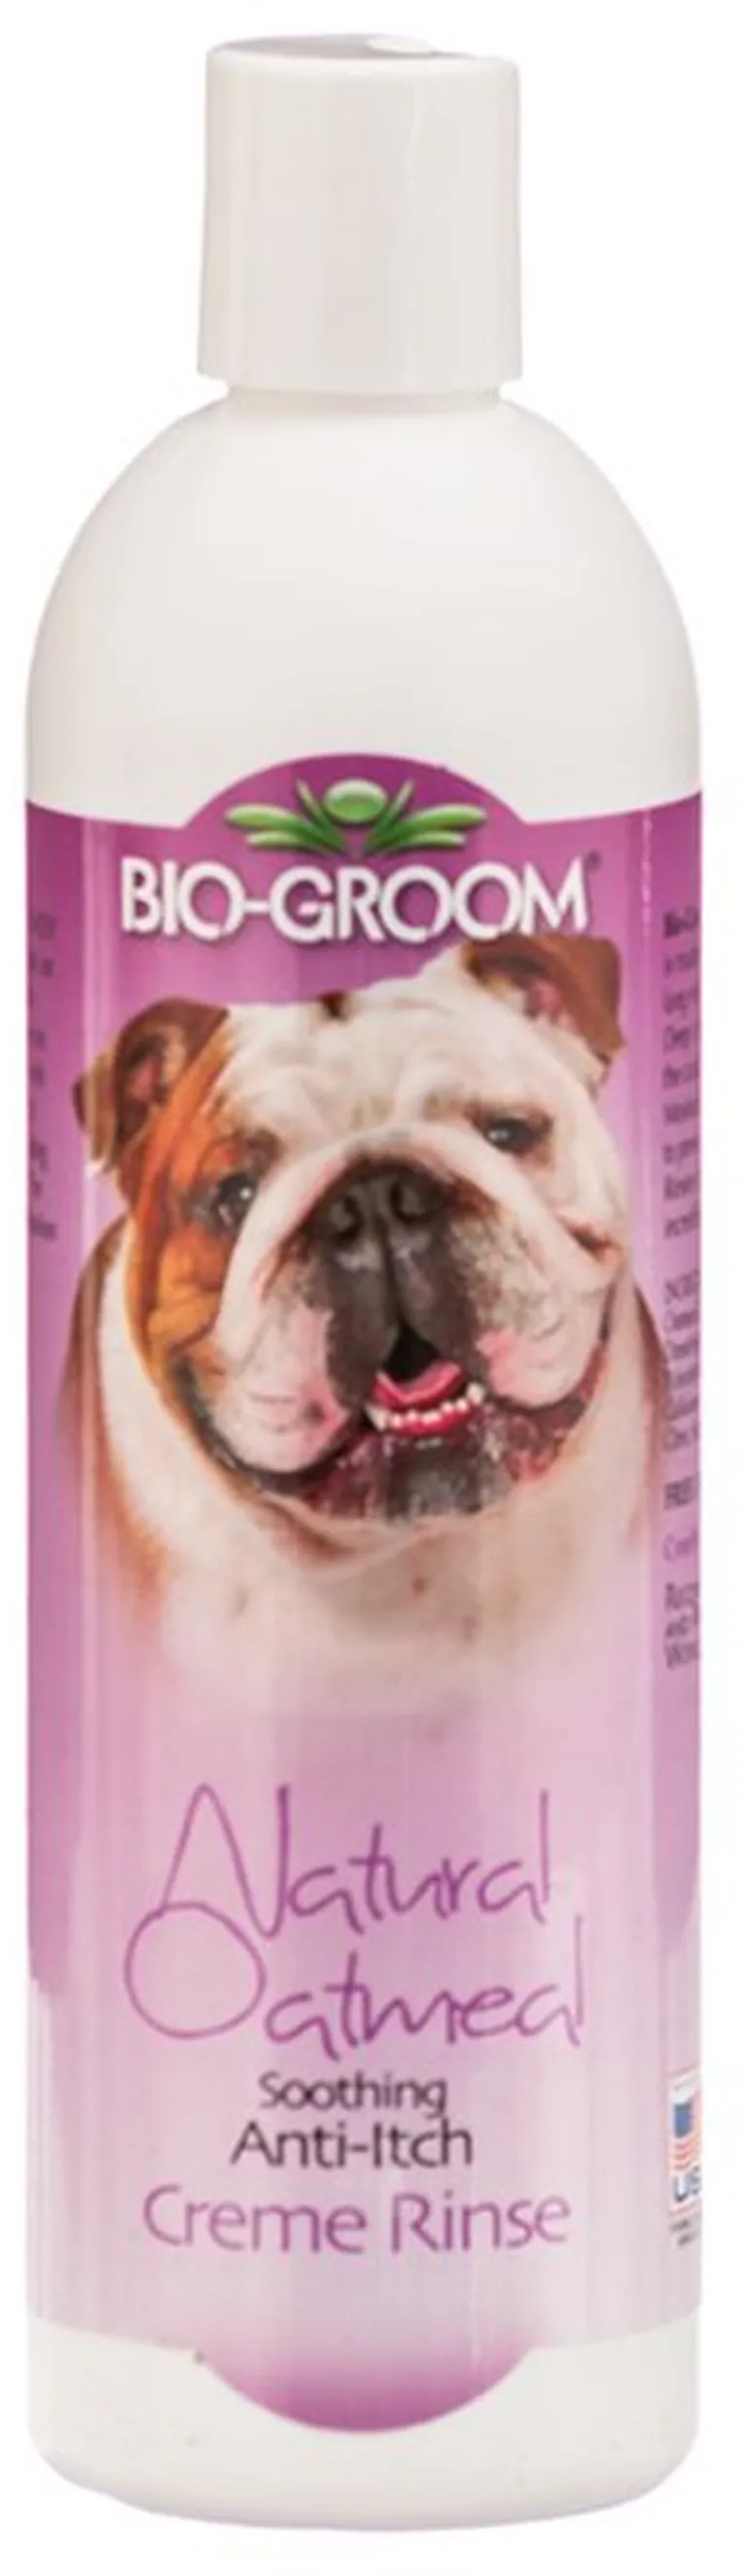 Bio Groom Natural Oatmeal Soothing Anti-Itch Creme Rinse Photo 1